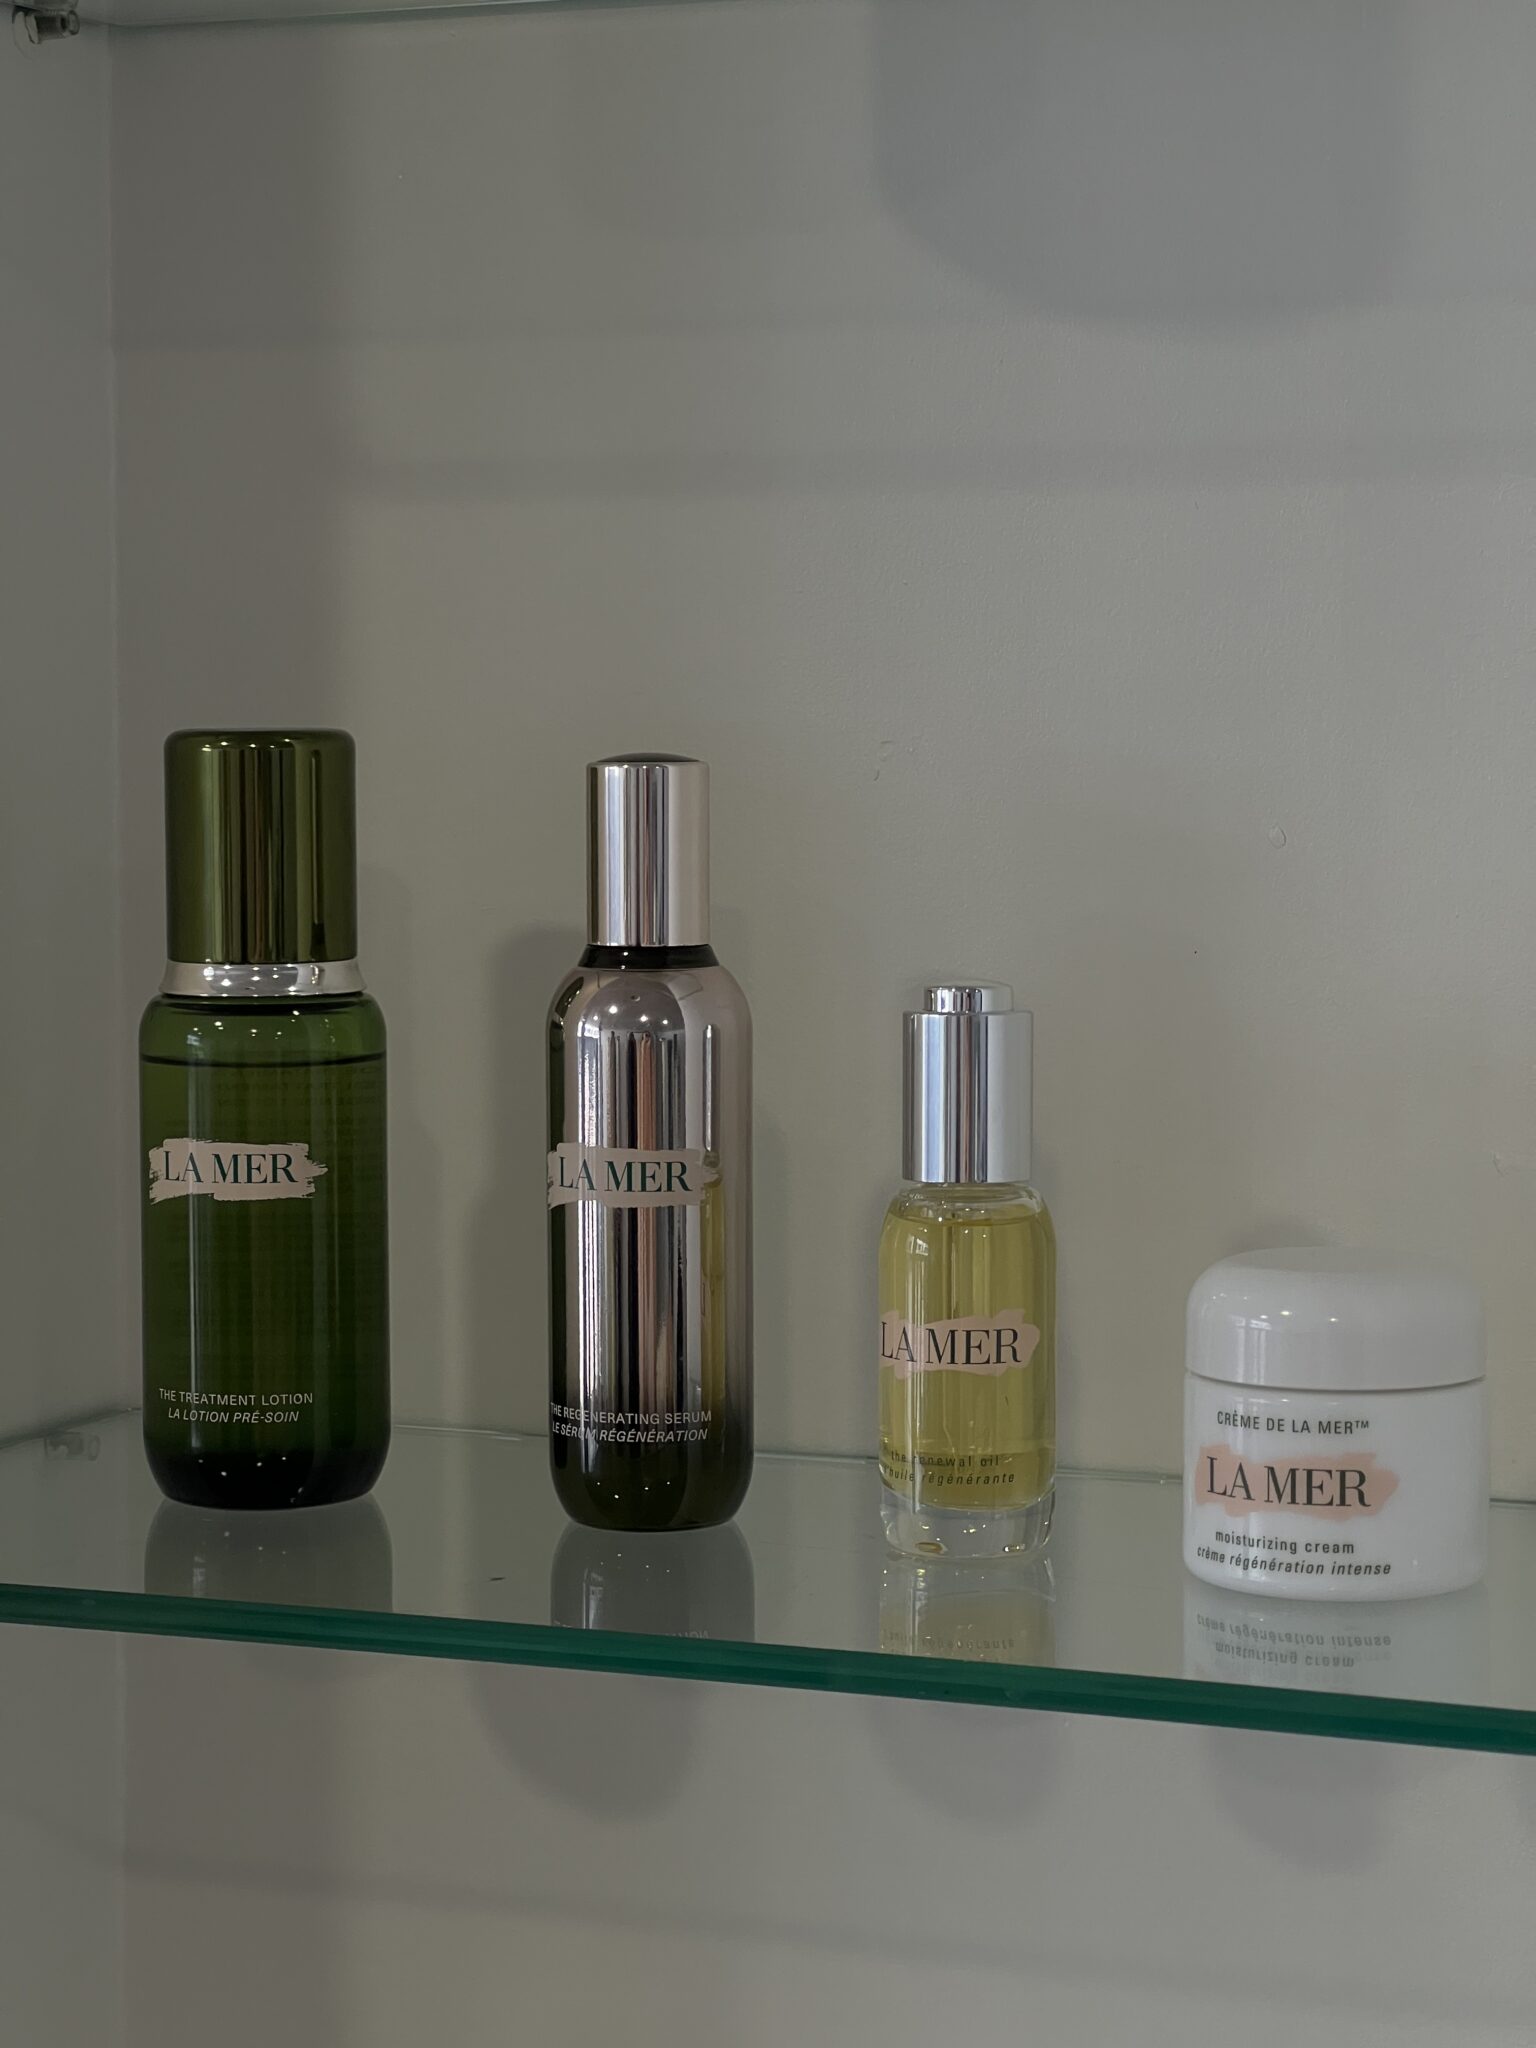 La Mer : 12 Things You Didn't Know About La Mer. Beauty Edit. 23